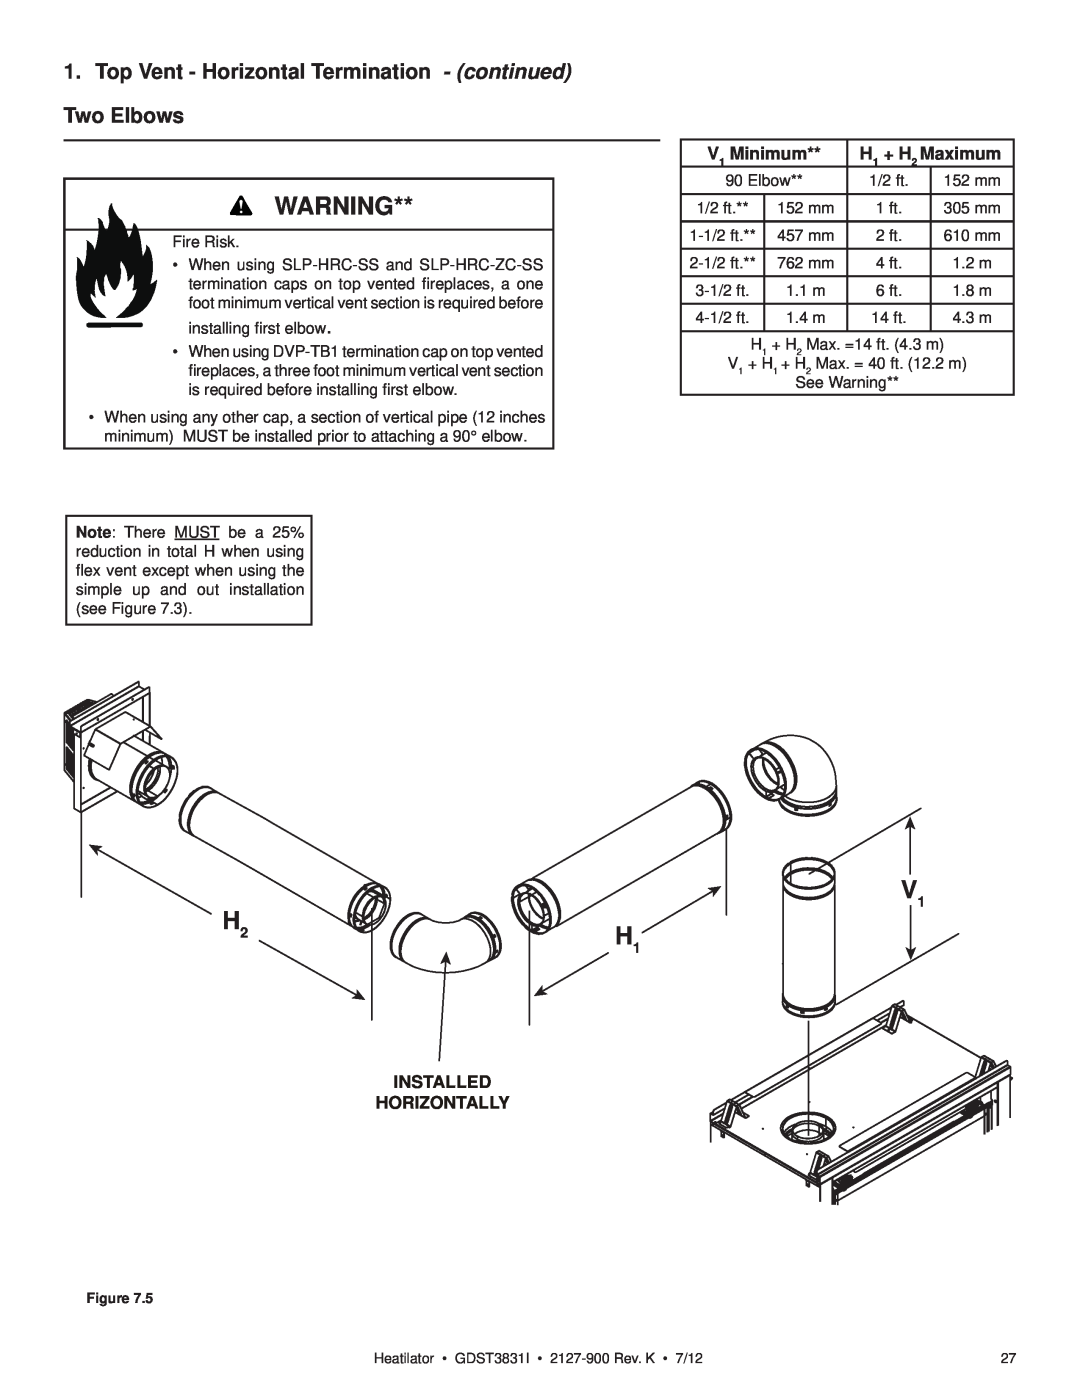 Heatiator GDST3831I owner manual Top Vent - Horizontal Termination - continued, Two Elbows, Installed Horizontally 